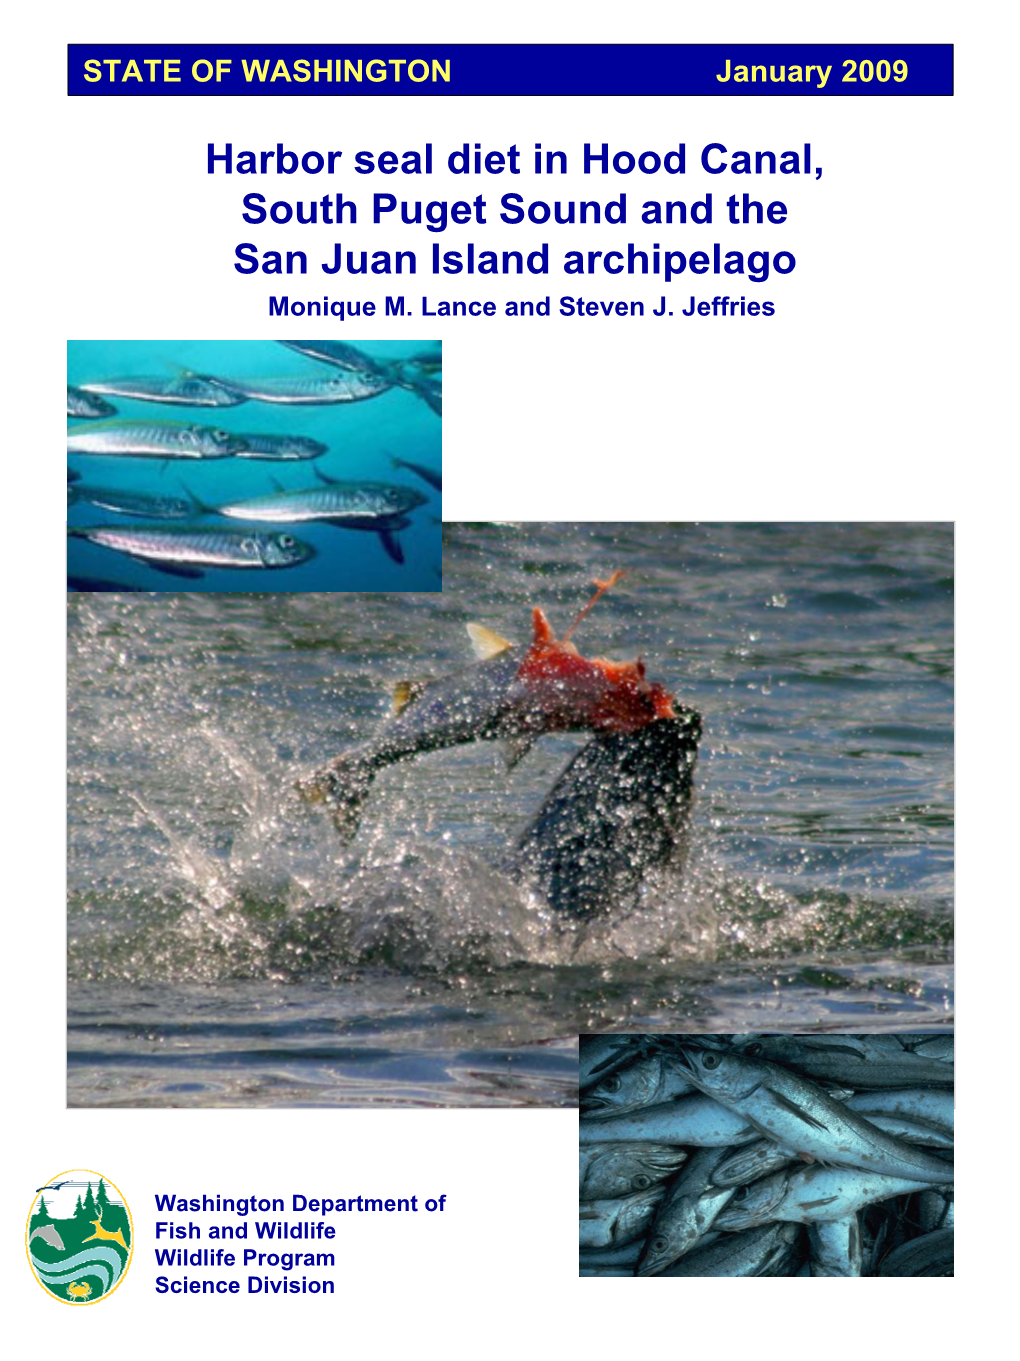 Harbor Seal Diet in Hood Canal, South Puget Sound and the San Juan Island Archipelago Monique M